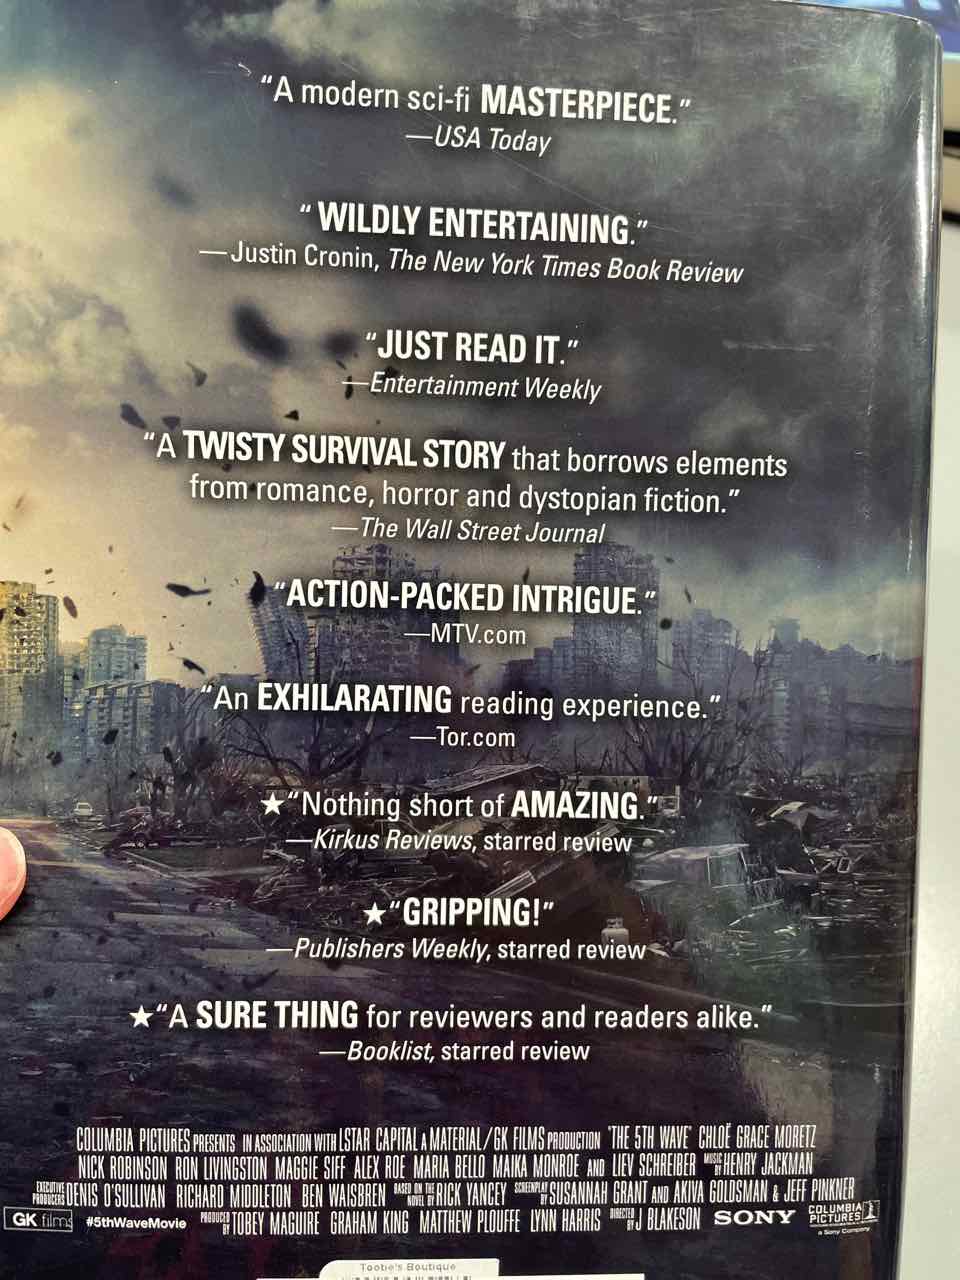 Book - 5th Wave by Rick Yancey